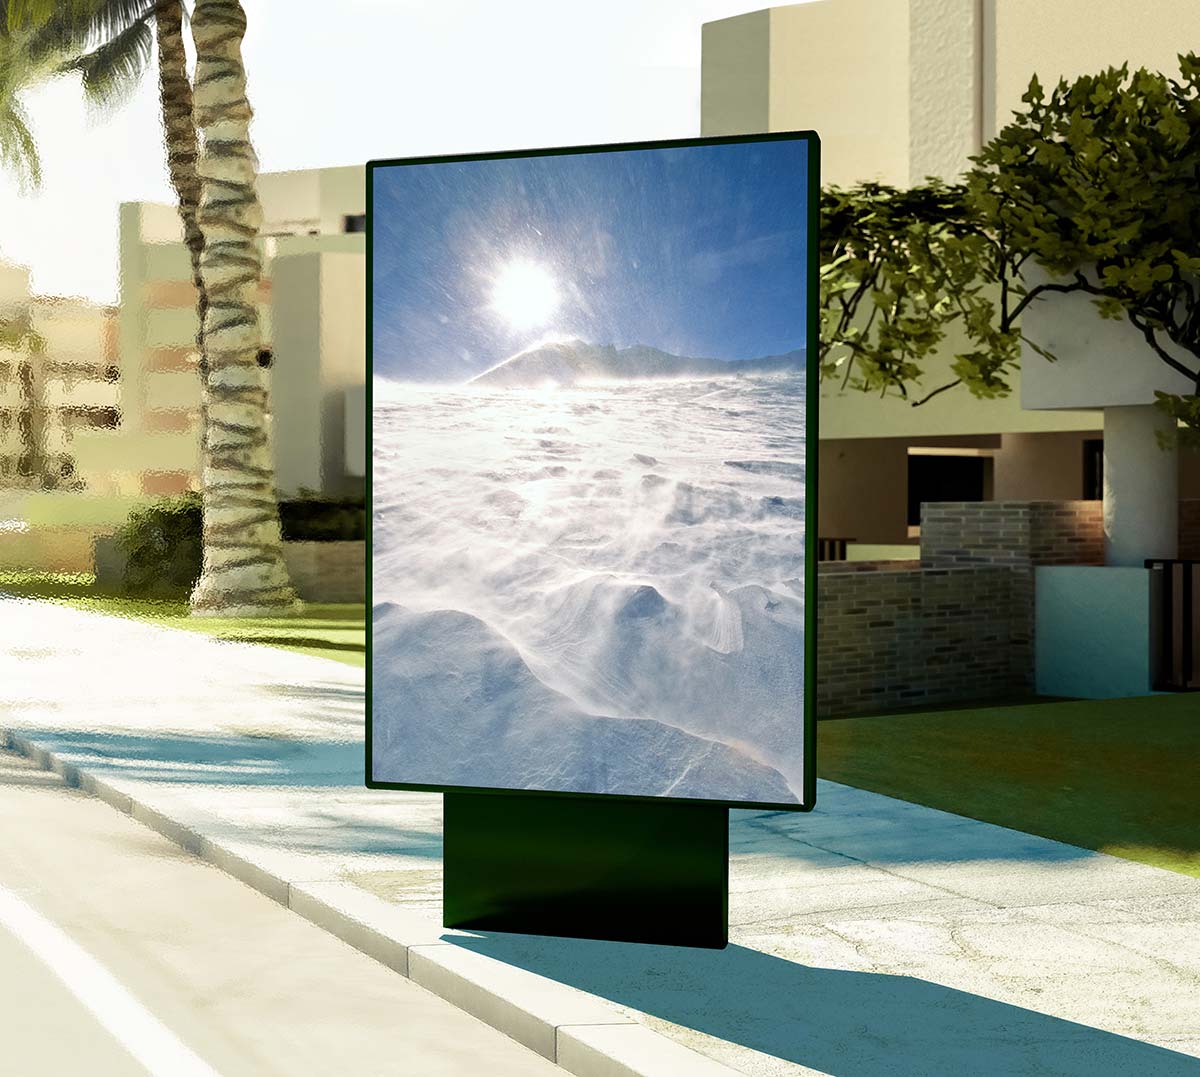 Digital signage dreams of a cool environment on a hot day.